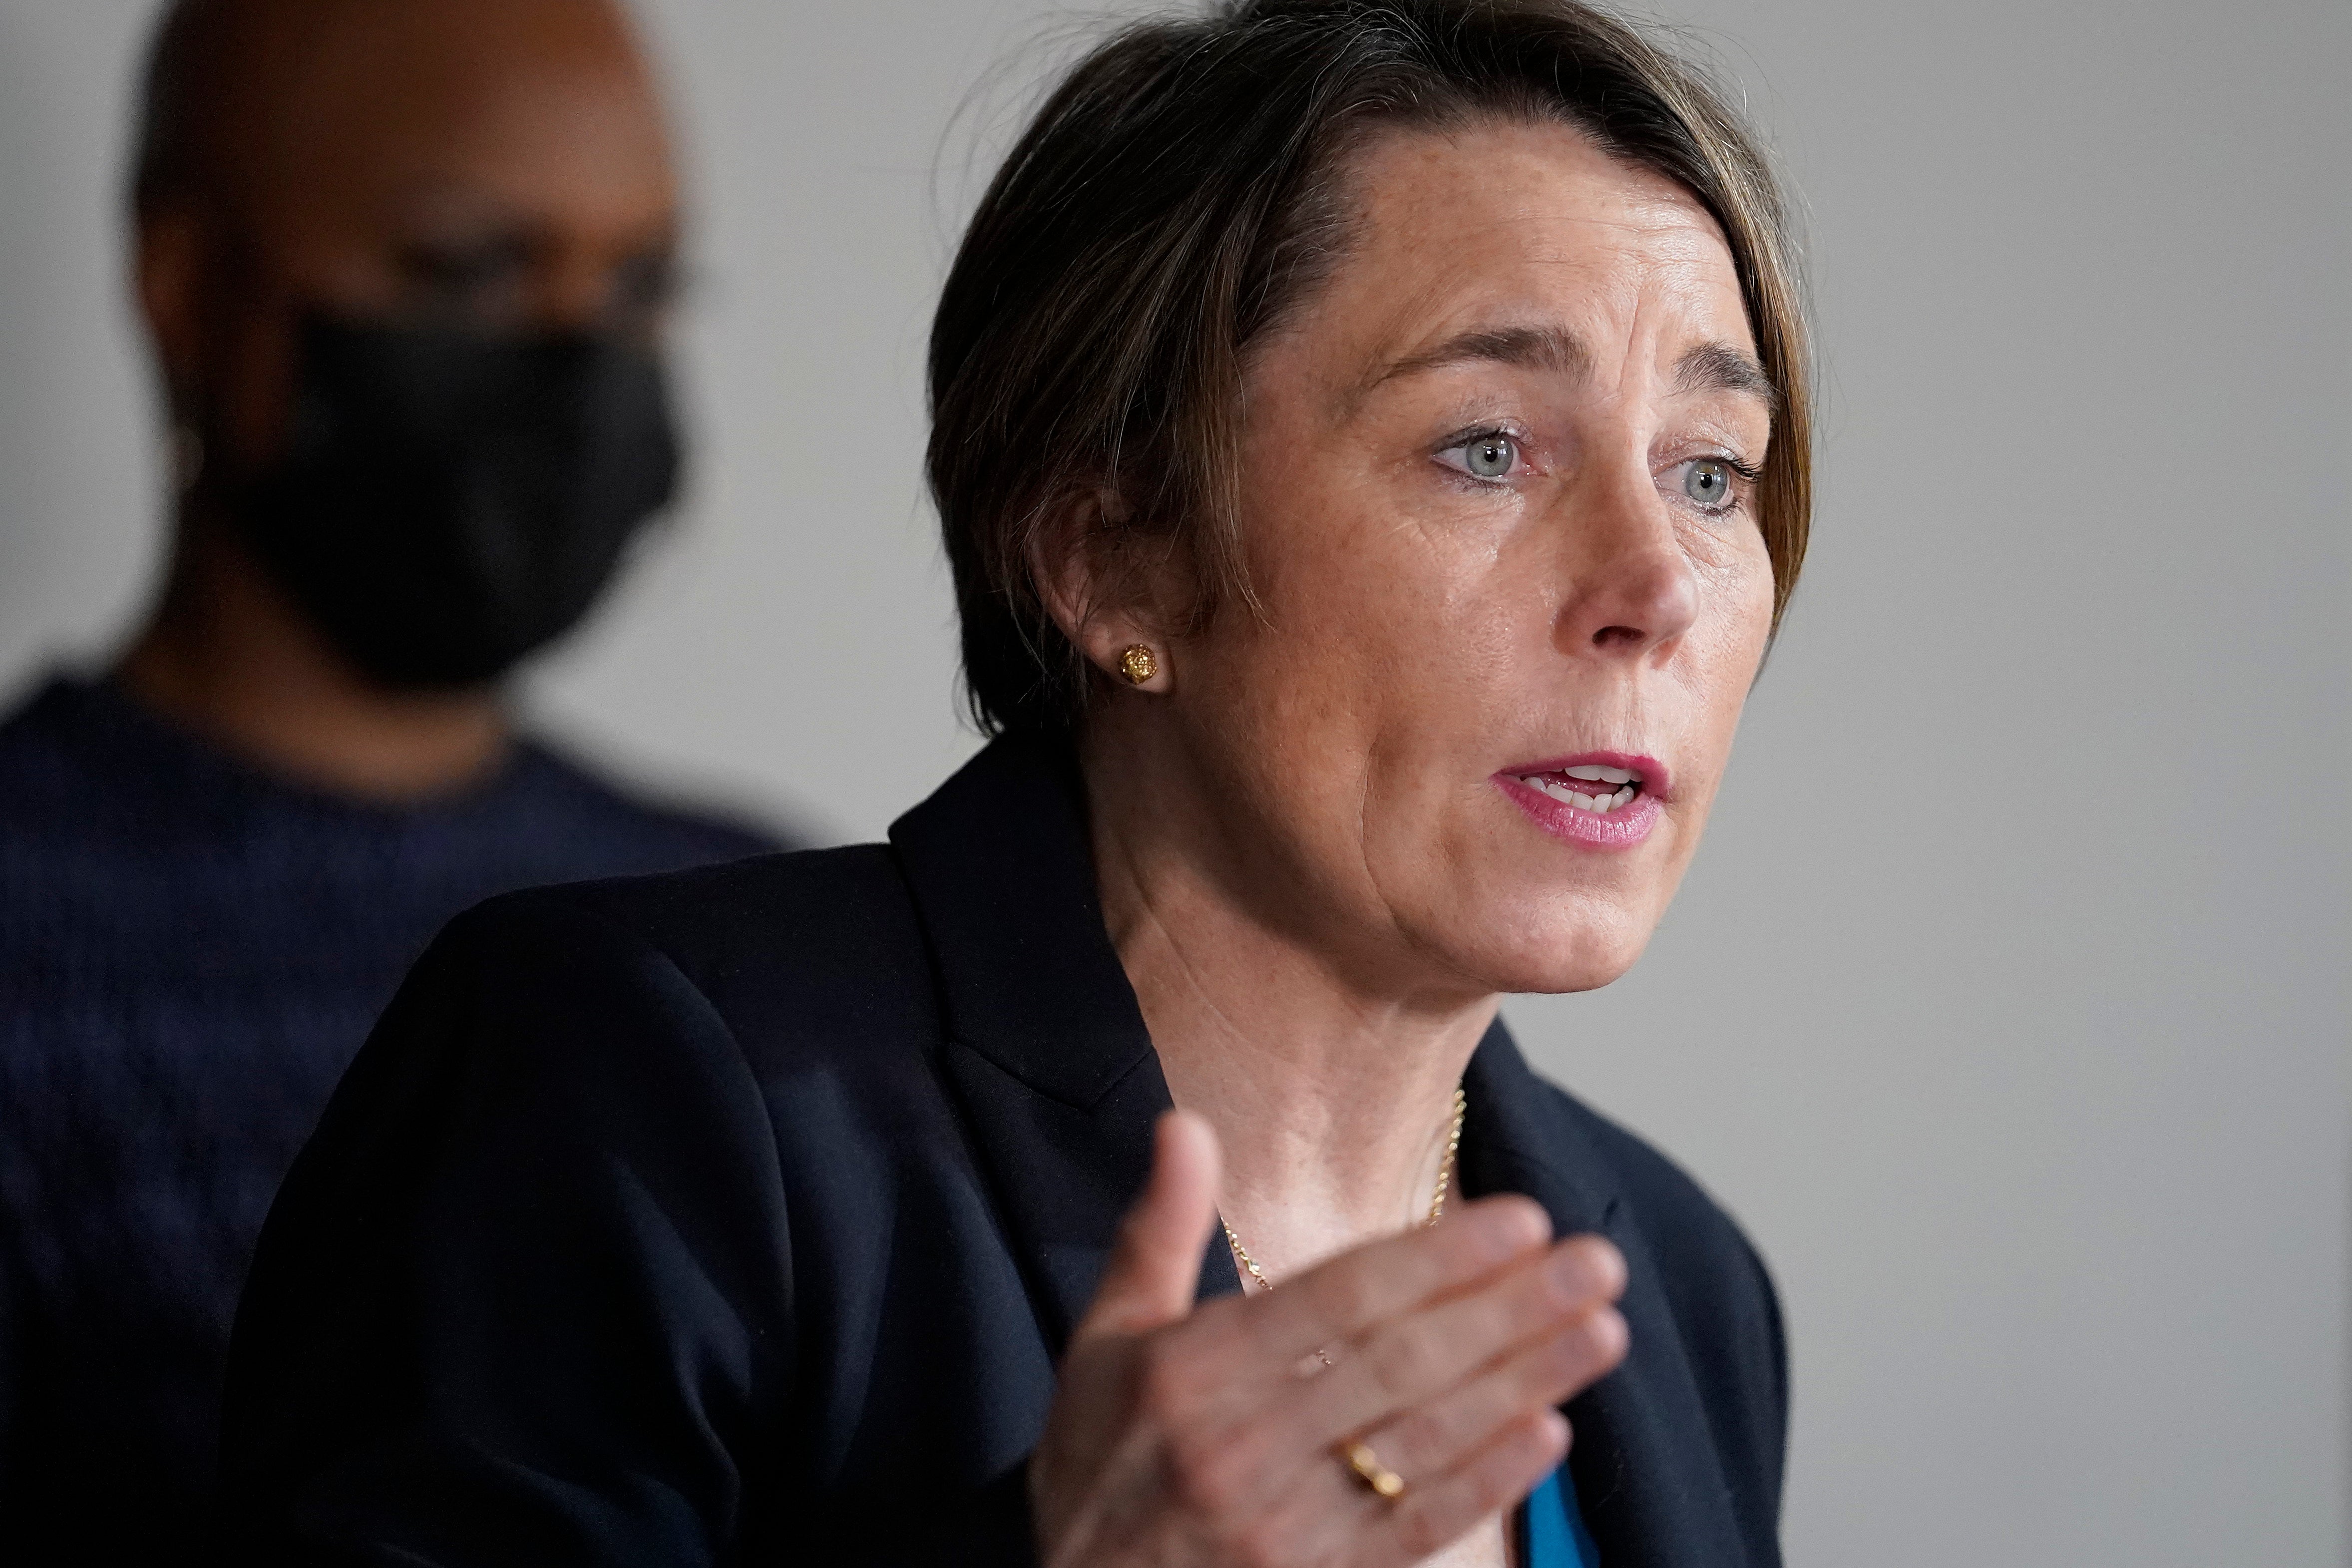 Massachusetts AG Maura Healey says it is ‘unacceptable’ for gun manufacturers to facilitate the illegal arms trade